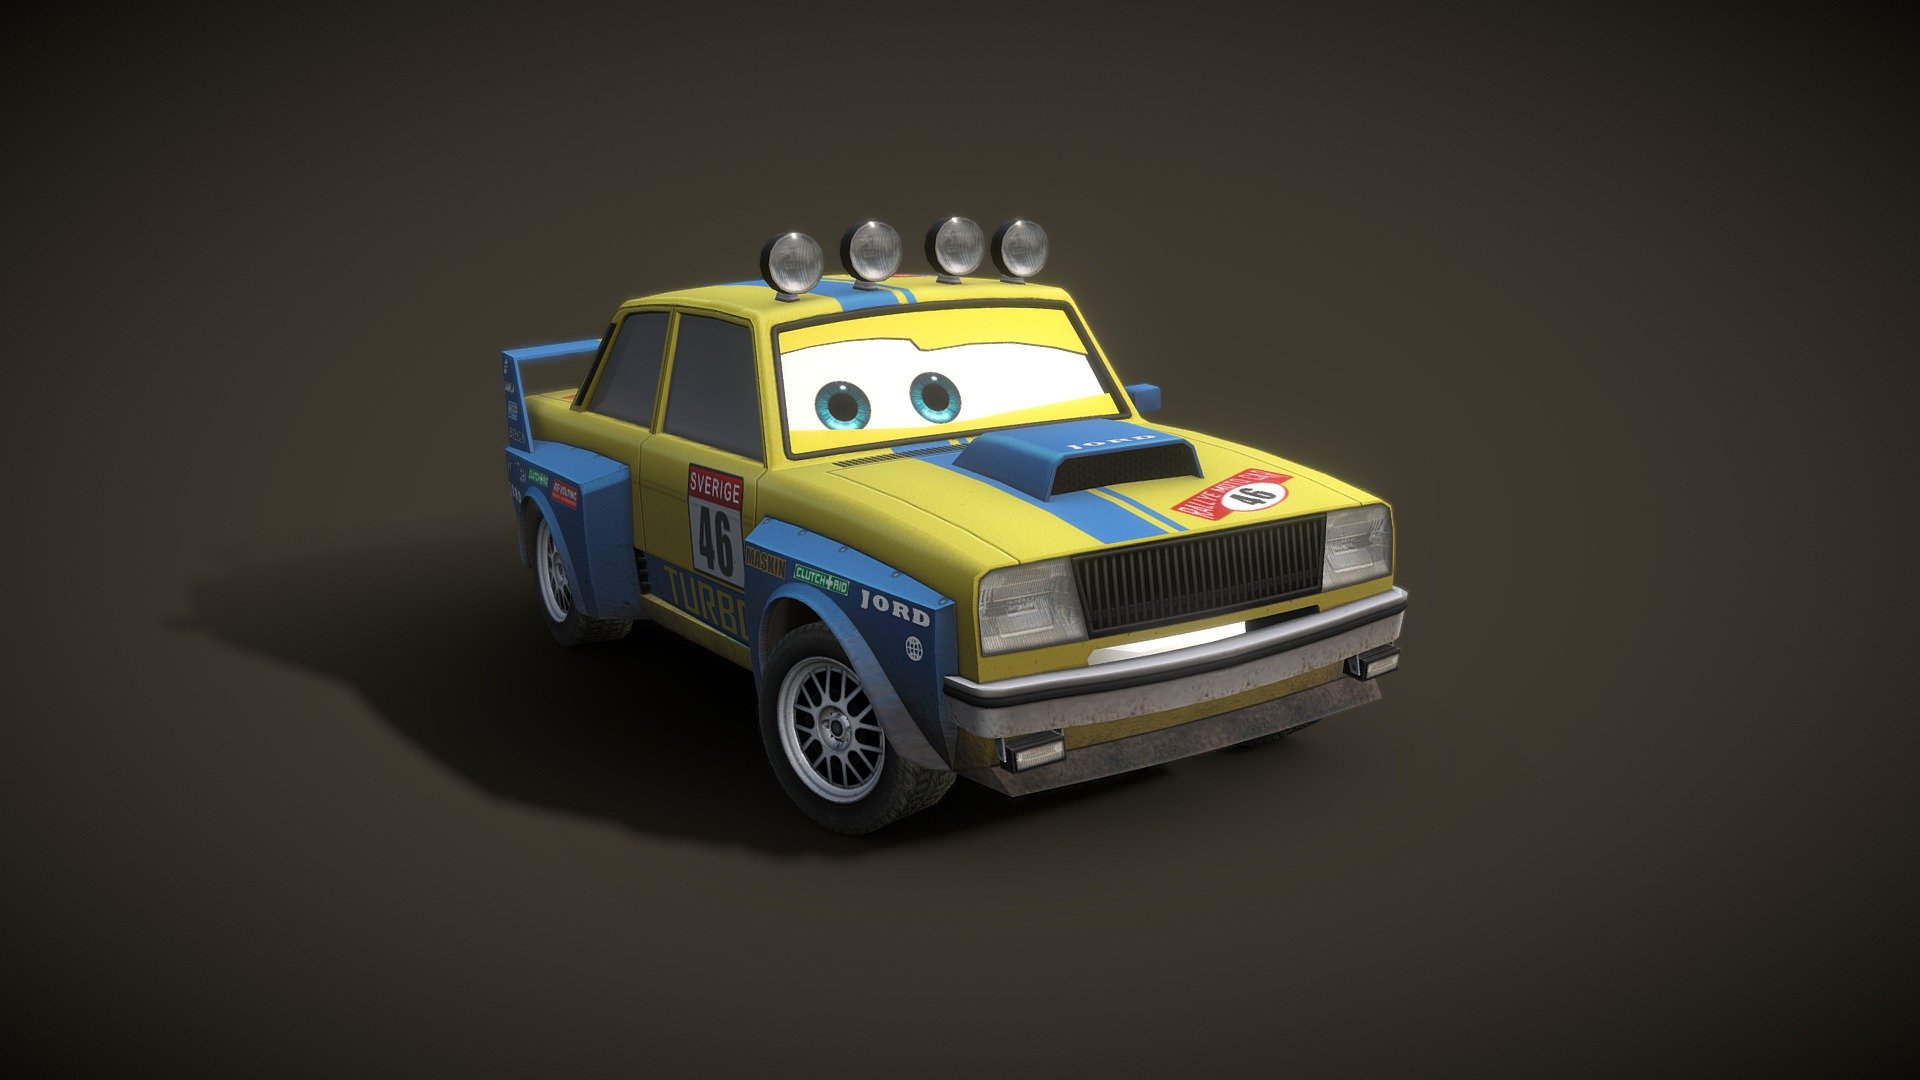 Gudmund is Sweden's reigning rally car champion in the 2007 video game Cars: Mater-National.  I was able to concept the character, then model, texture, and rig him for the game. He was a fun character to work on as i love the older Volvos.

Please note: I cannot sell or allow download of this model as this is the actual game model built for the Pixar Cars video game franchise 3d model